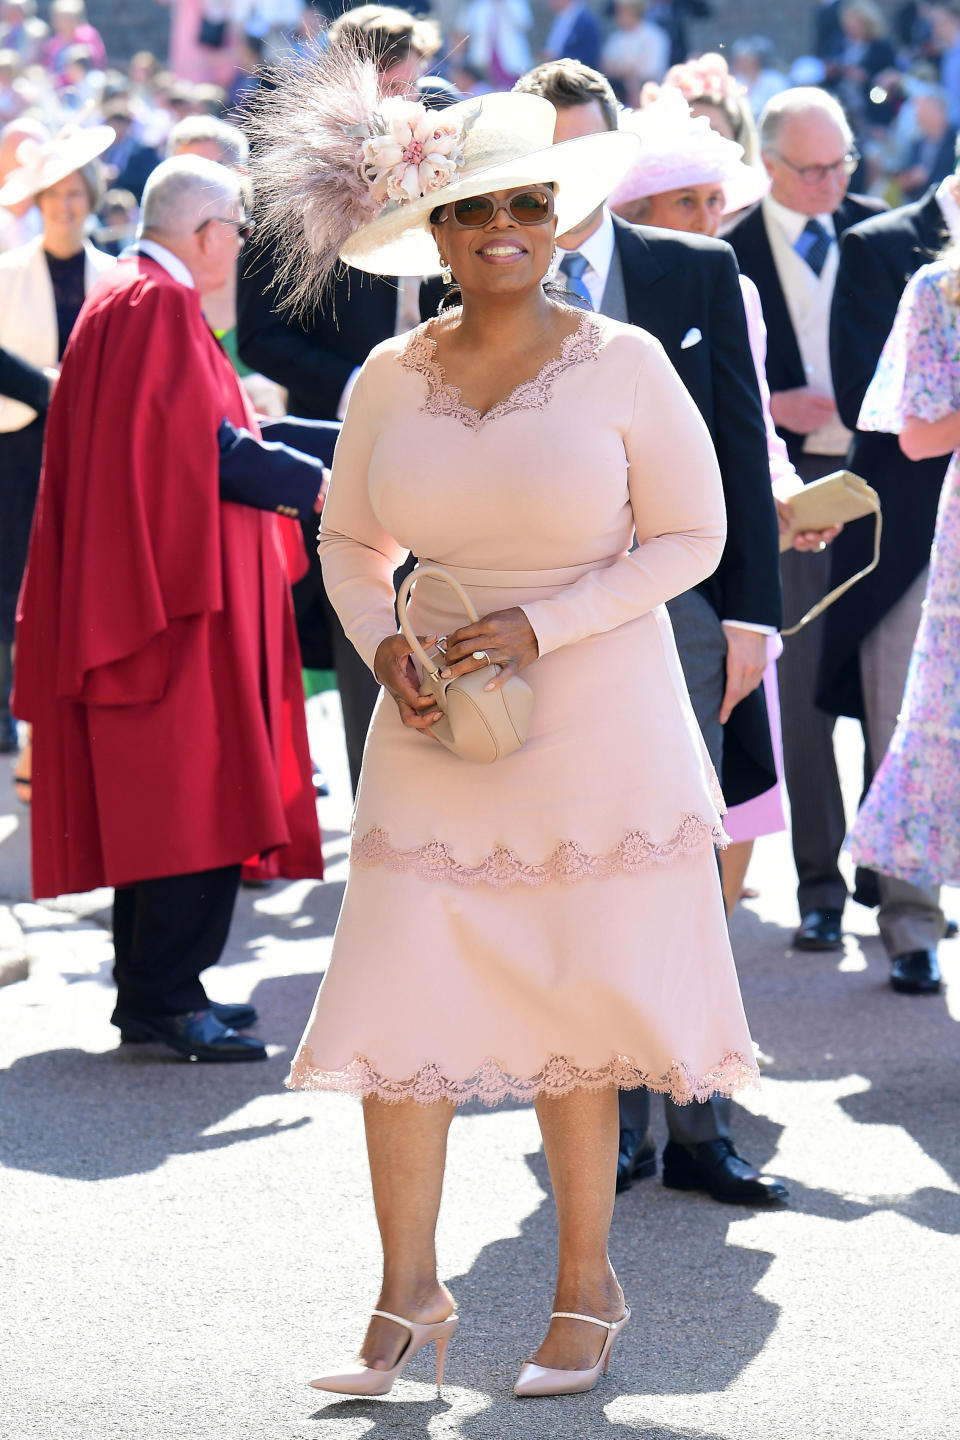 Oprah Winfrey attended the royal wedding last May. (Photo: Ian West – WPA Pool/Getty Images)